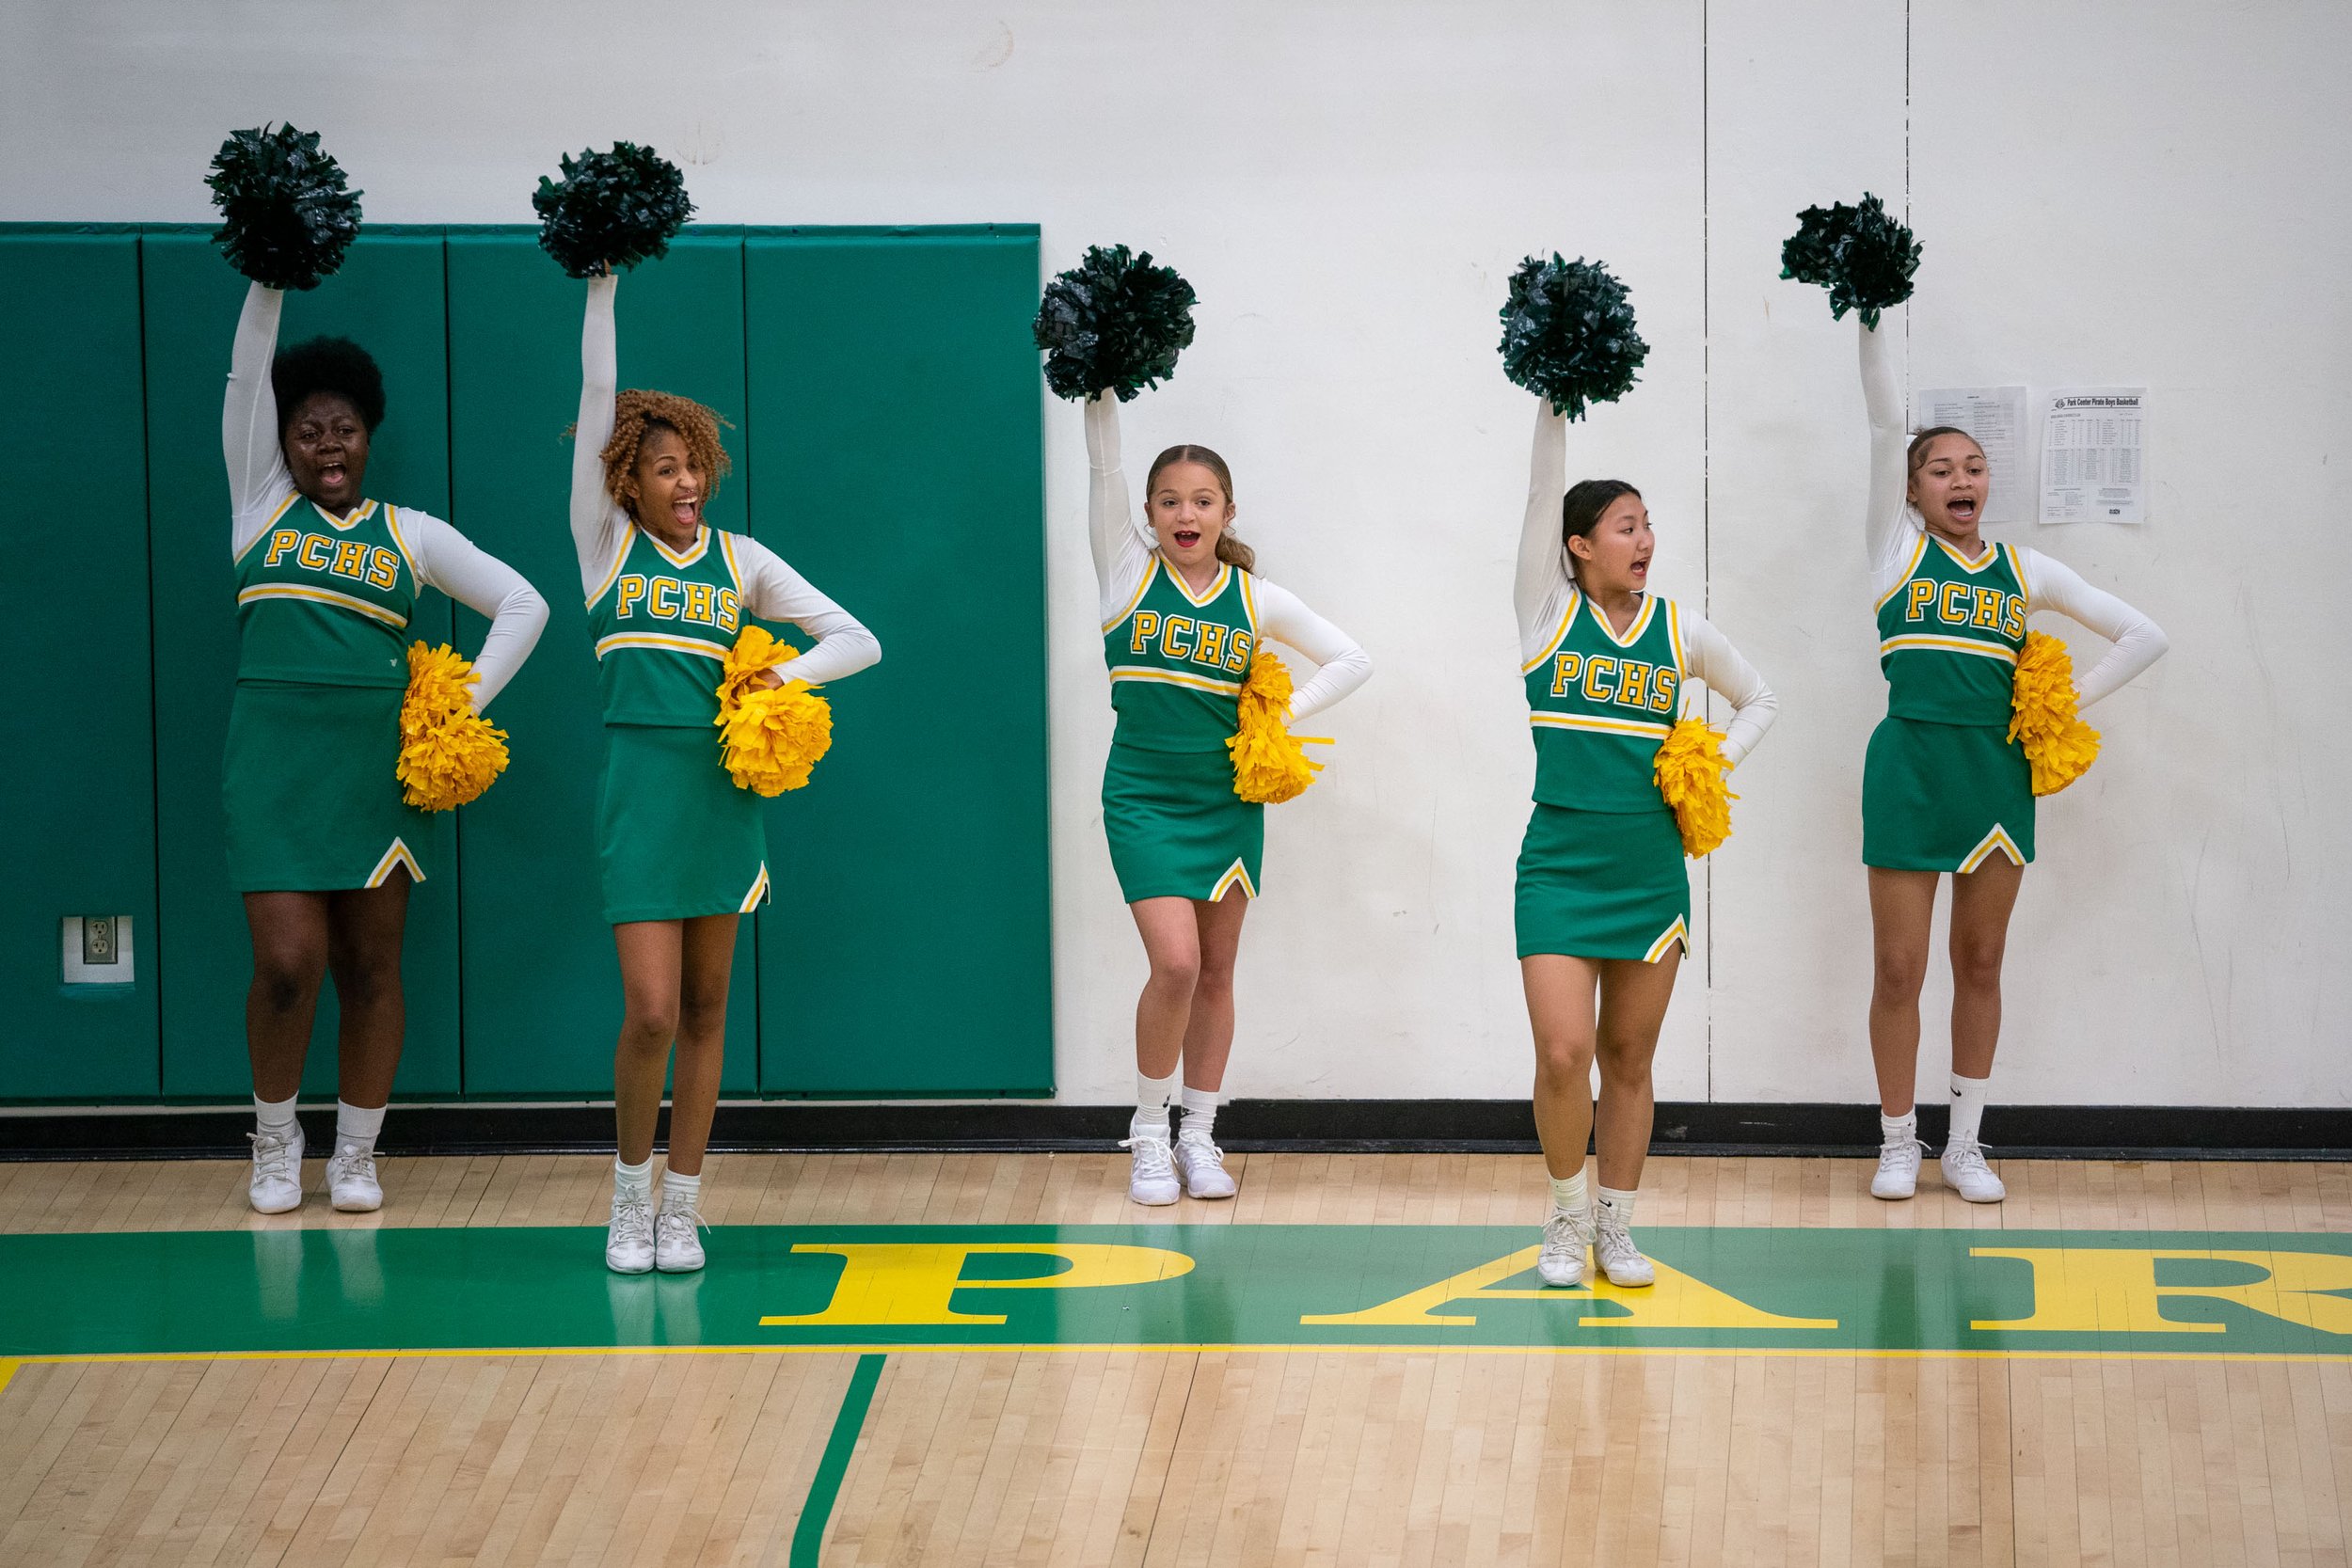  Cheerleaders are able to pump up the crowd in-person after several years of isolation during a Boys’ Varsity Basketball game at Park Center High School Jan. 10, 2023 in Brooklyn Park, Minn. Park Center High School enrolls over 2,000 students and is 